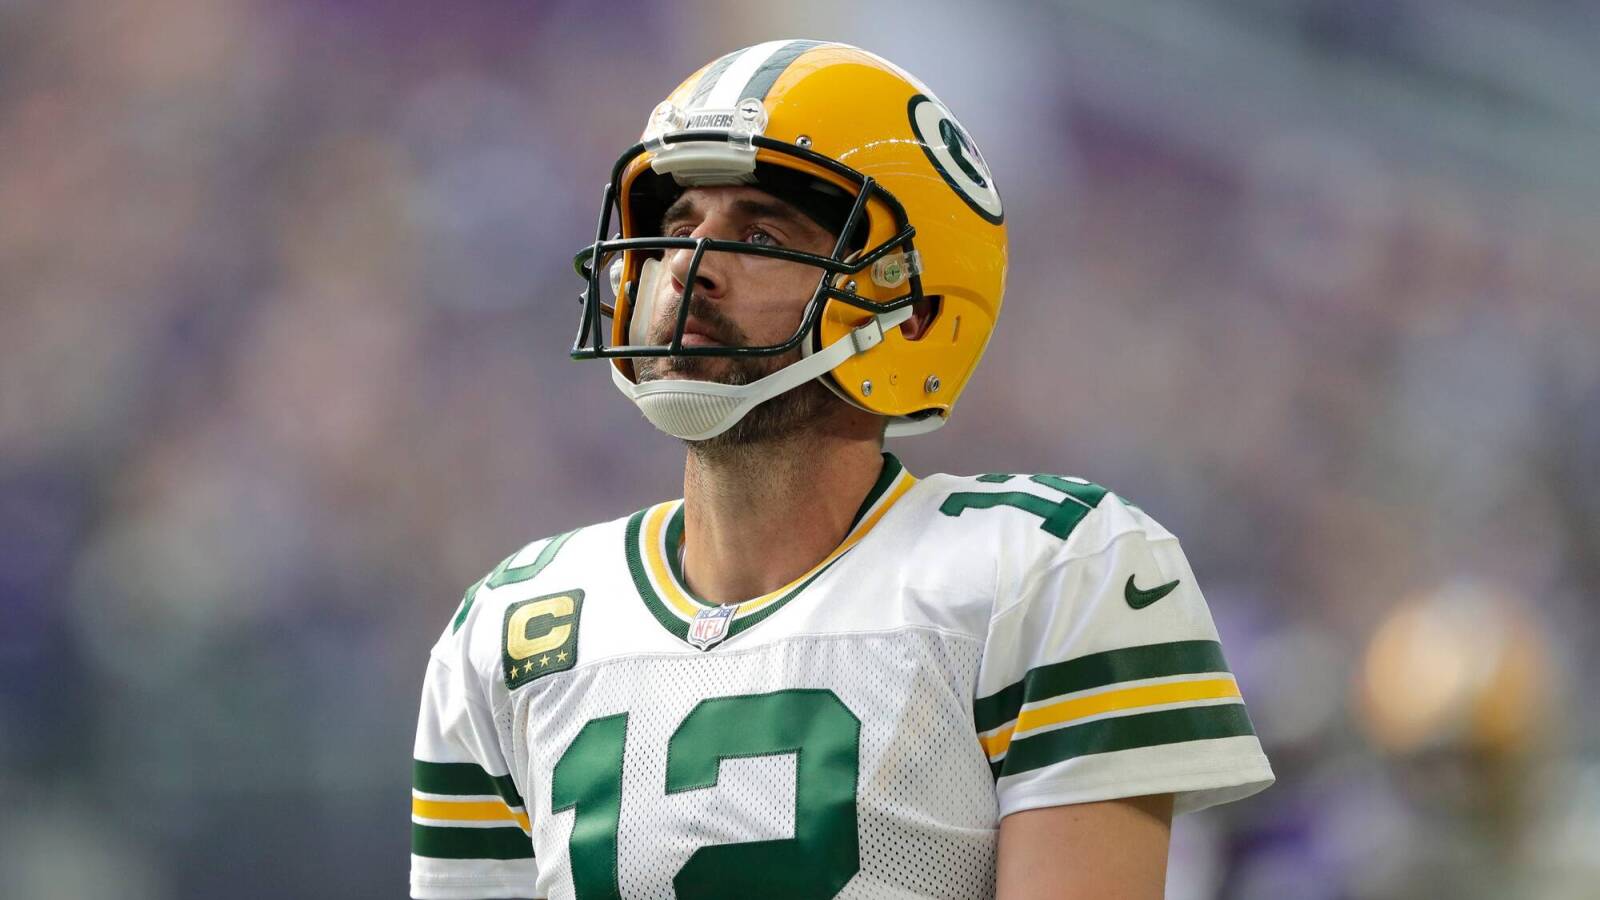 Former Jets QB guarantees Aaron Rodgers won't wear No. 12 with New York